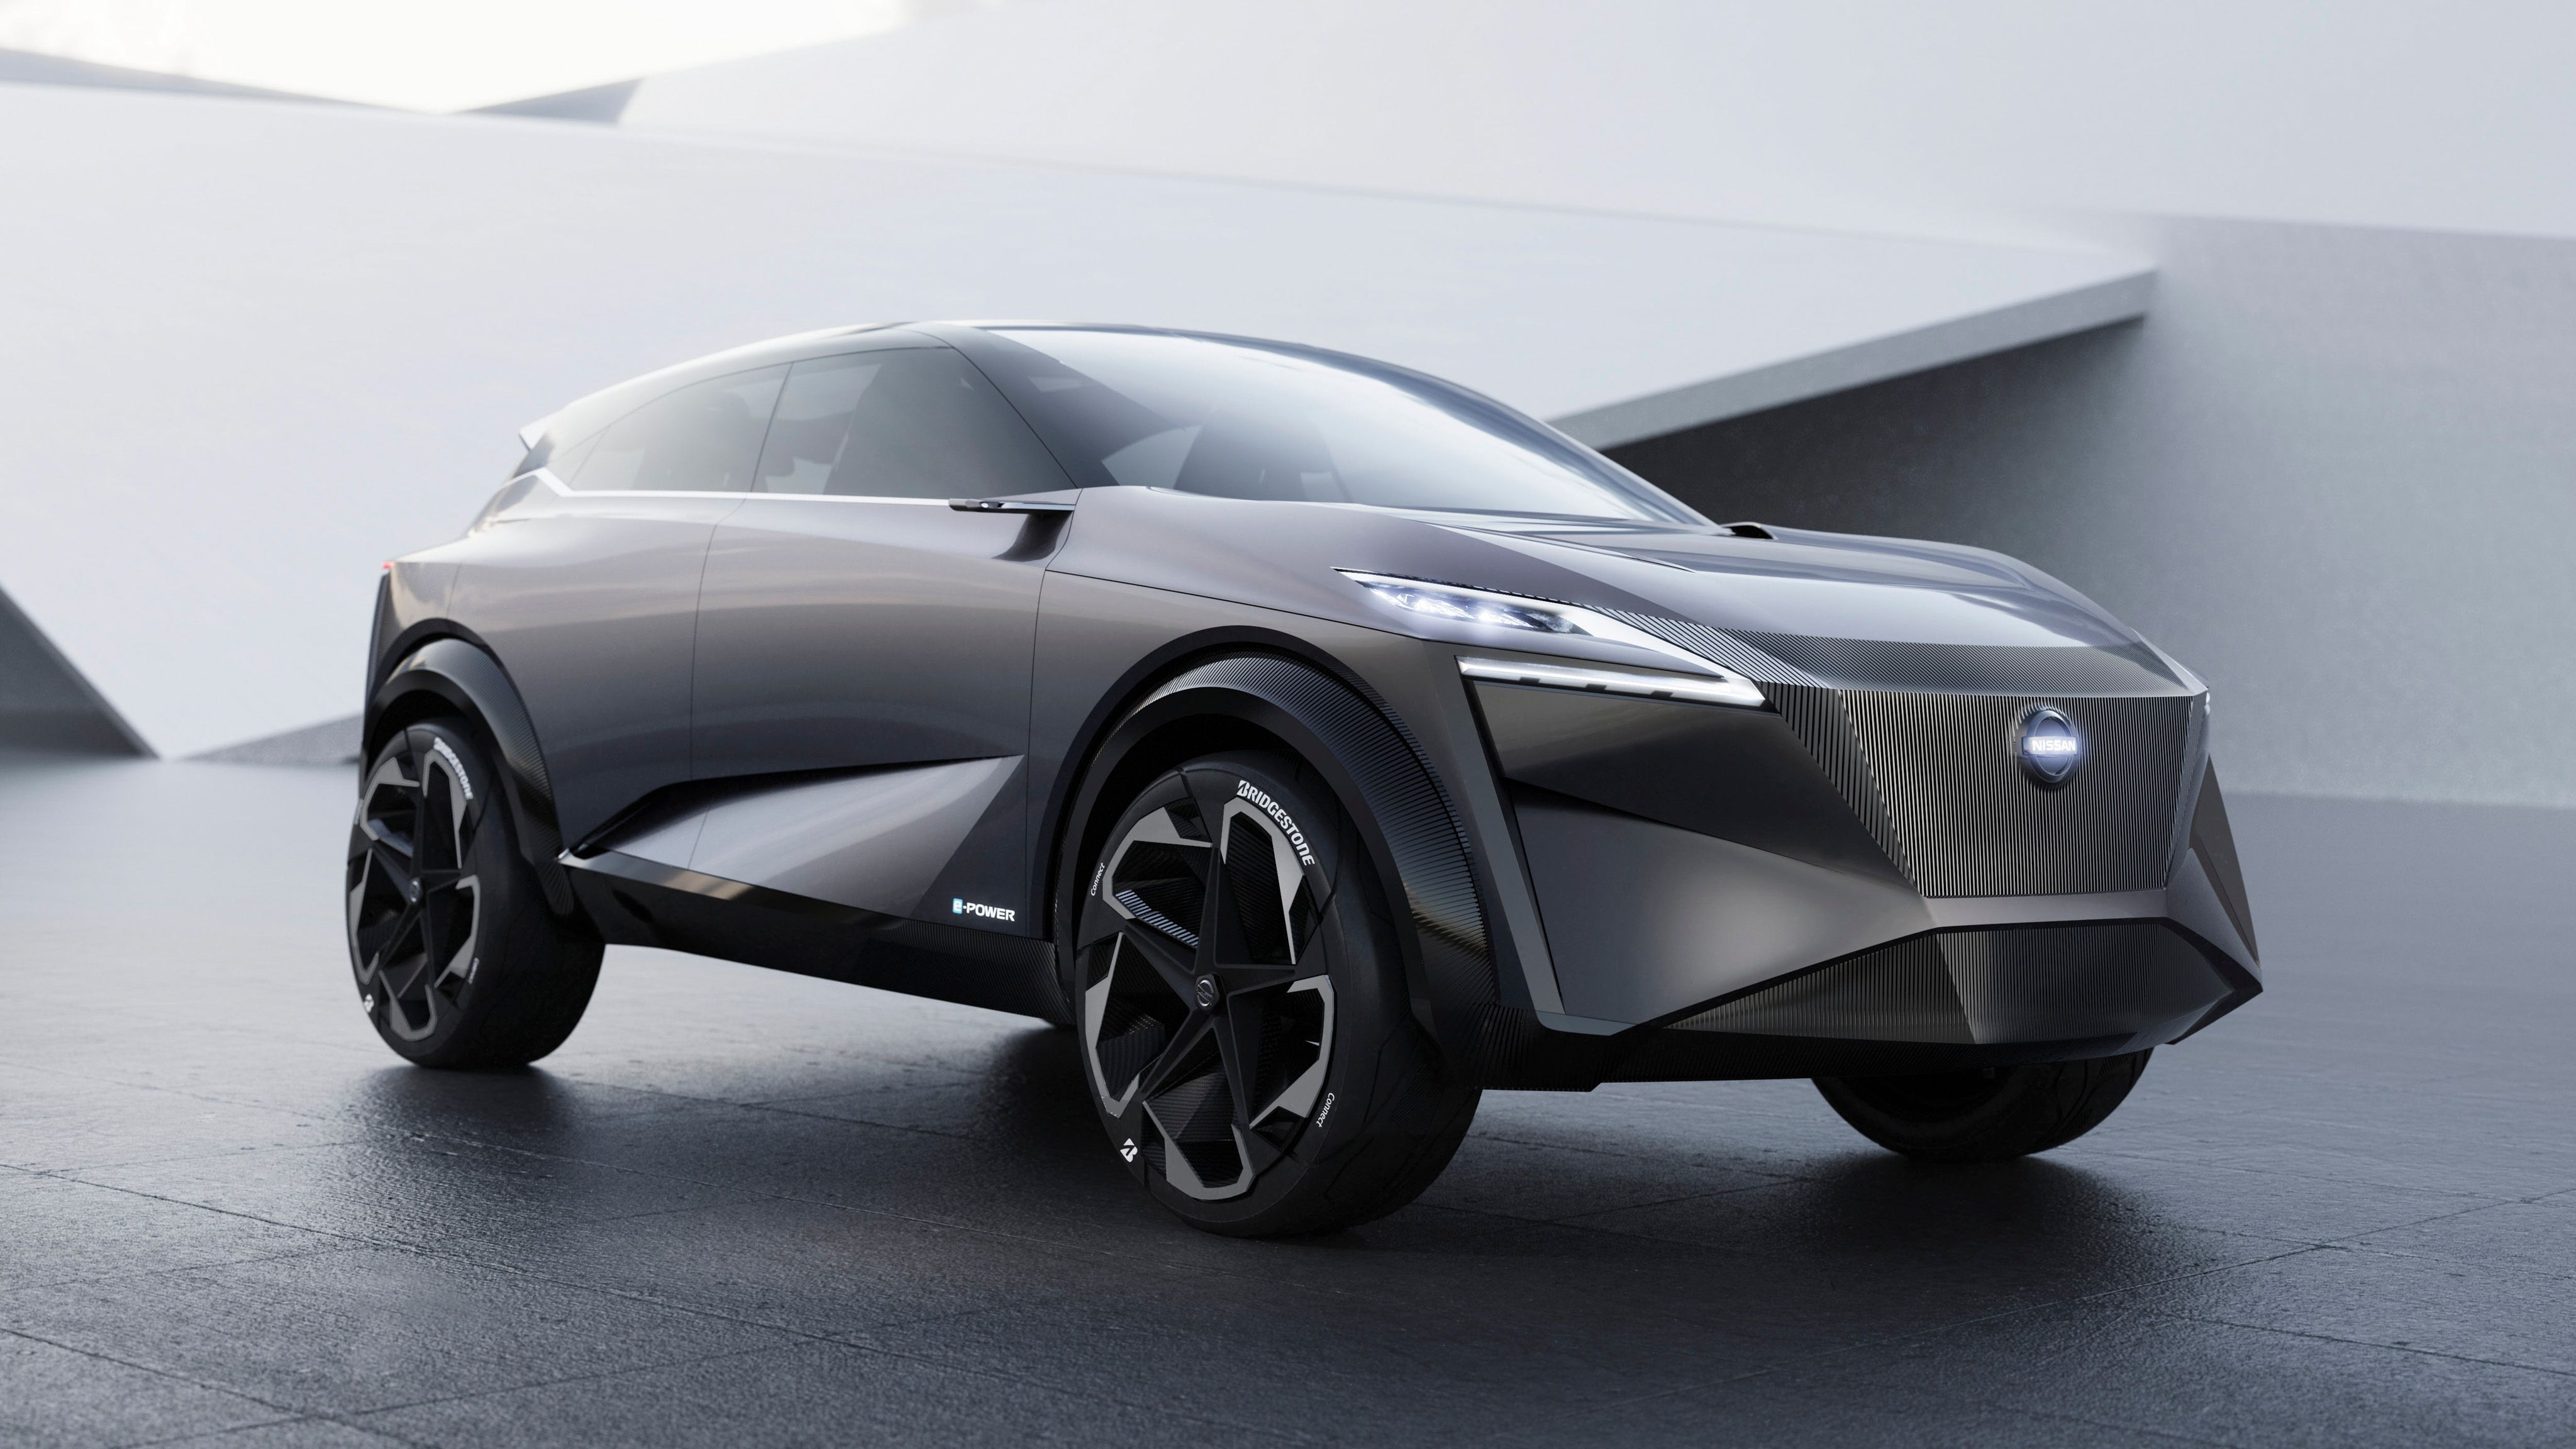 2018 The 2019 Nissan IMQ Concept Previews Questionable Crossover Design for the Future, But Nice Tech